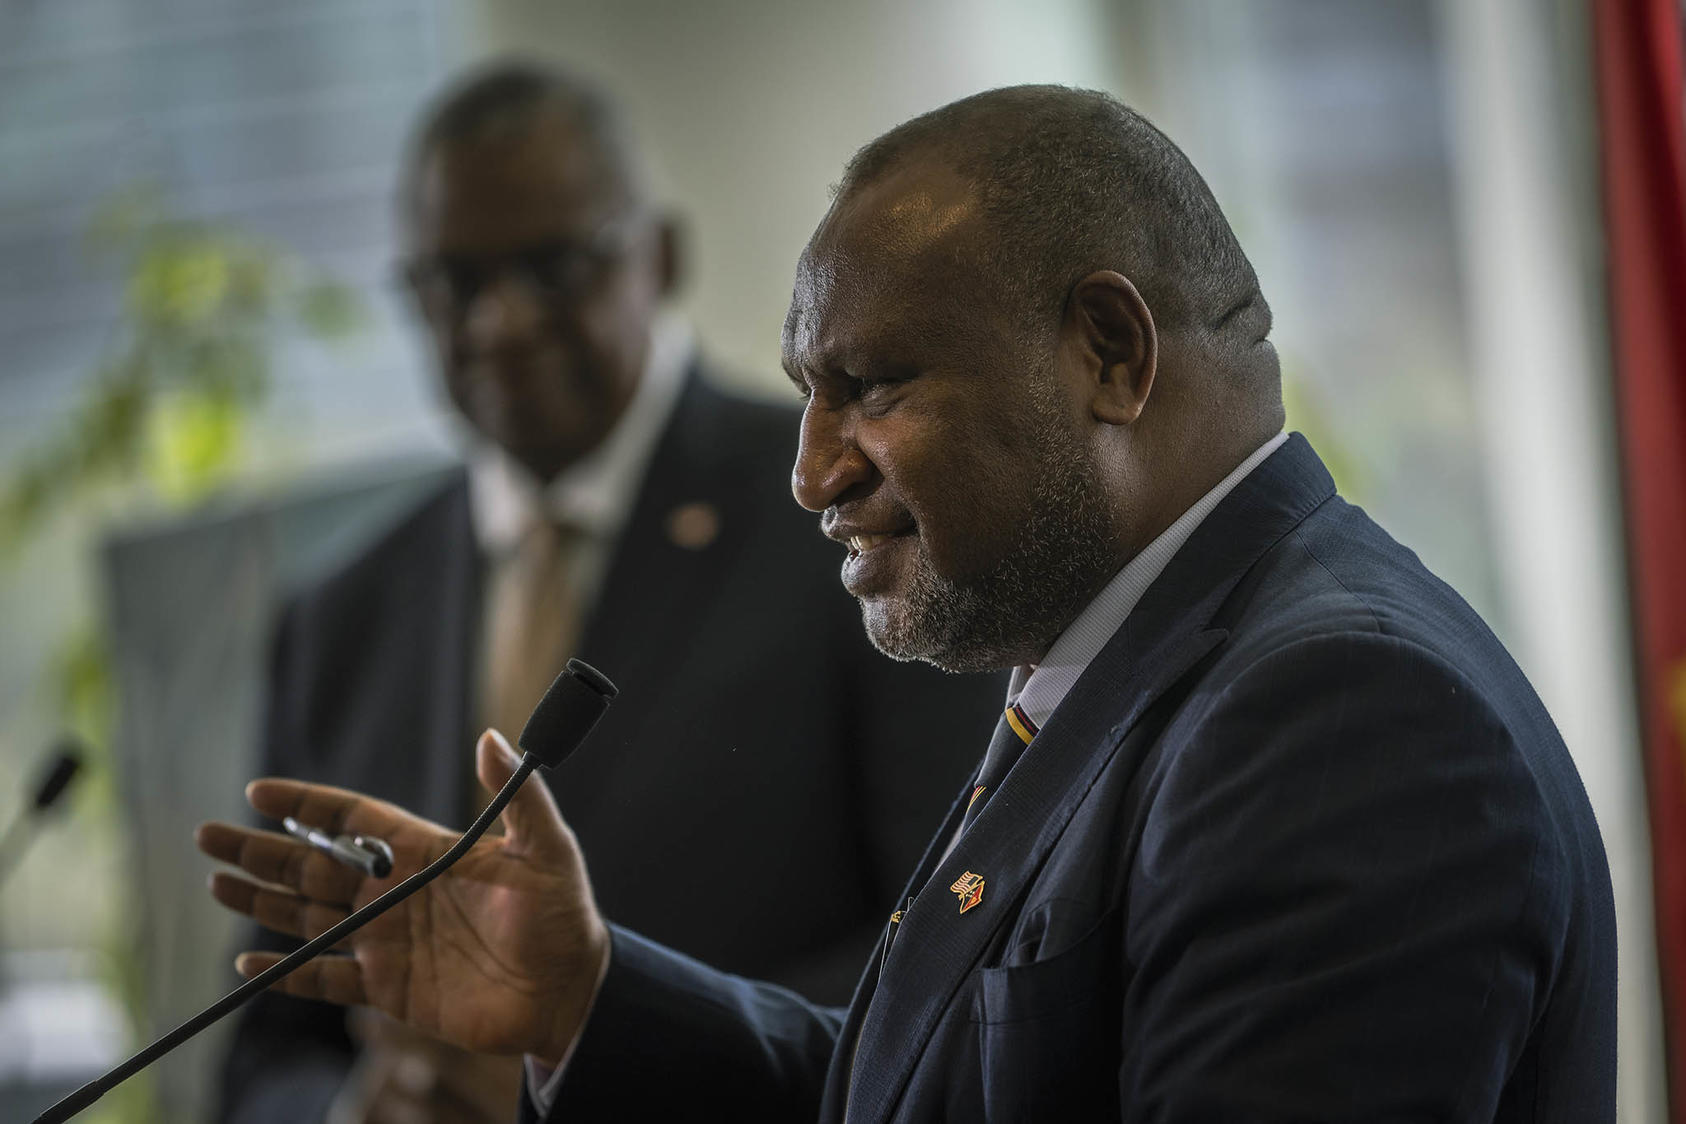 Papua New Guinea’s prime minister, James Marape, meets reporters last year with U.S. Defense Secretary Lloyd Austin, one of several top U.S. officials to visit amid a growing U.S. focus on the country. (Chad J. McNeeley/Defense Department)